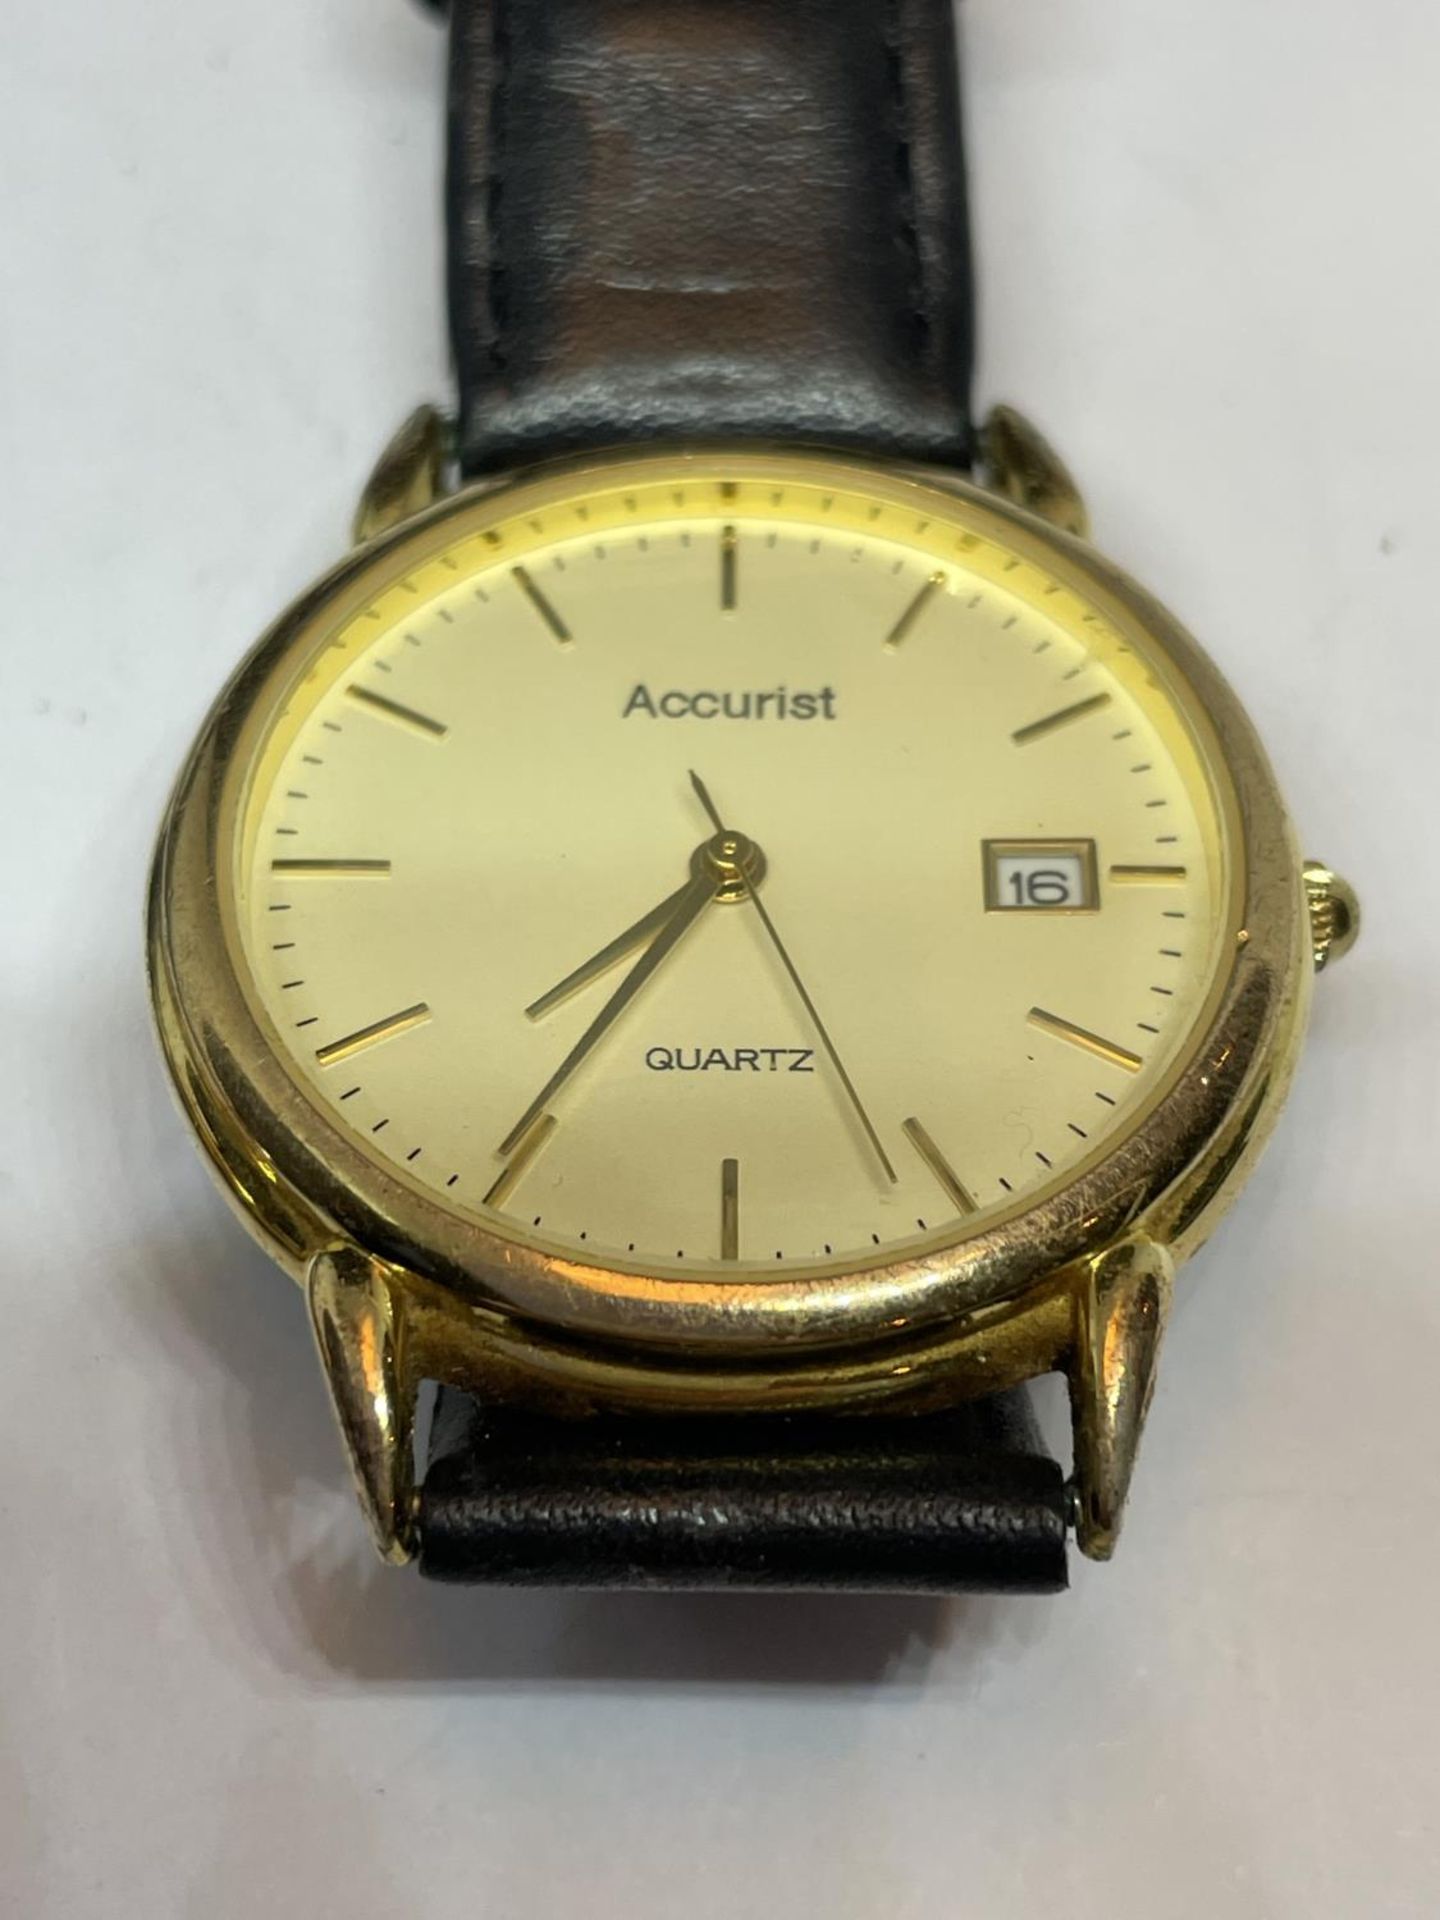 TWO ACCURIST WRIST WATCHES SEEN WORKING BUT NO WARRANTY - Image 3 of 3